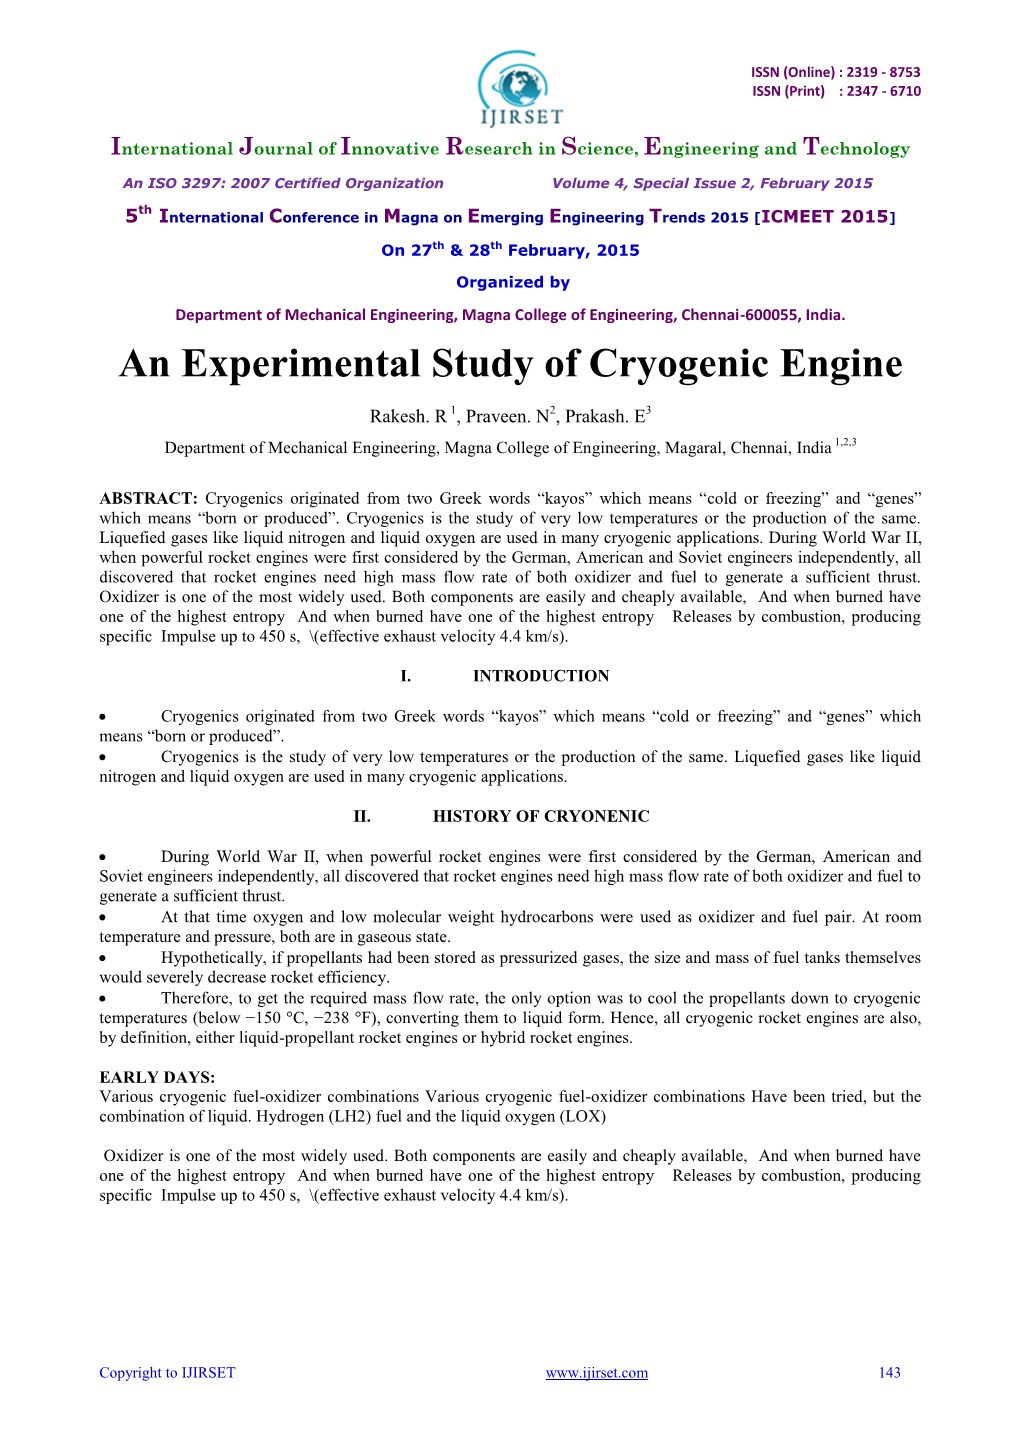 An Experimental Study of Cryogenic Engine